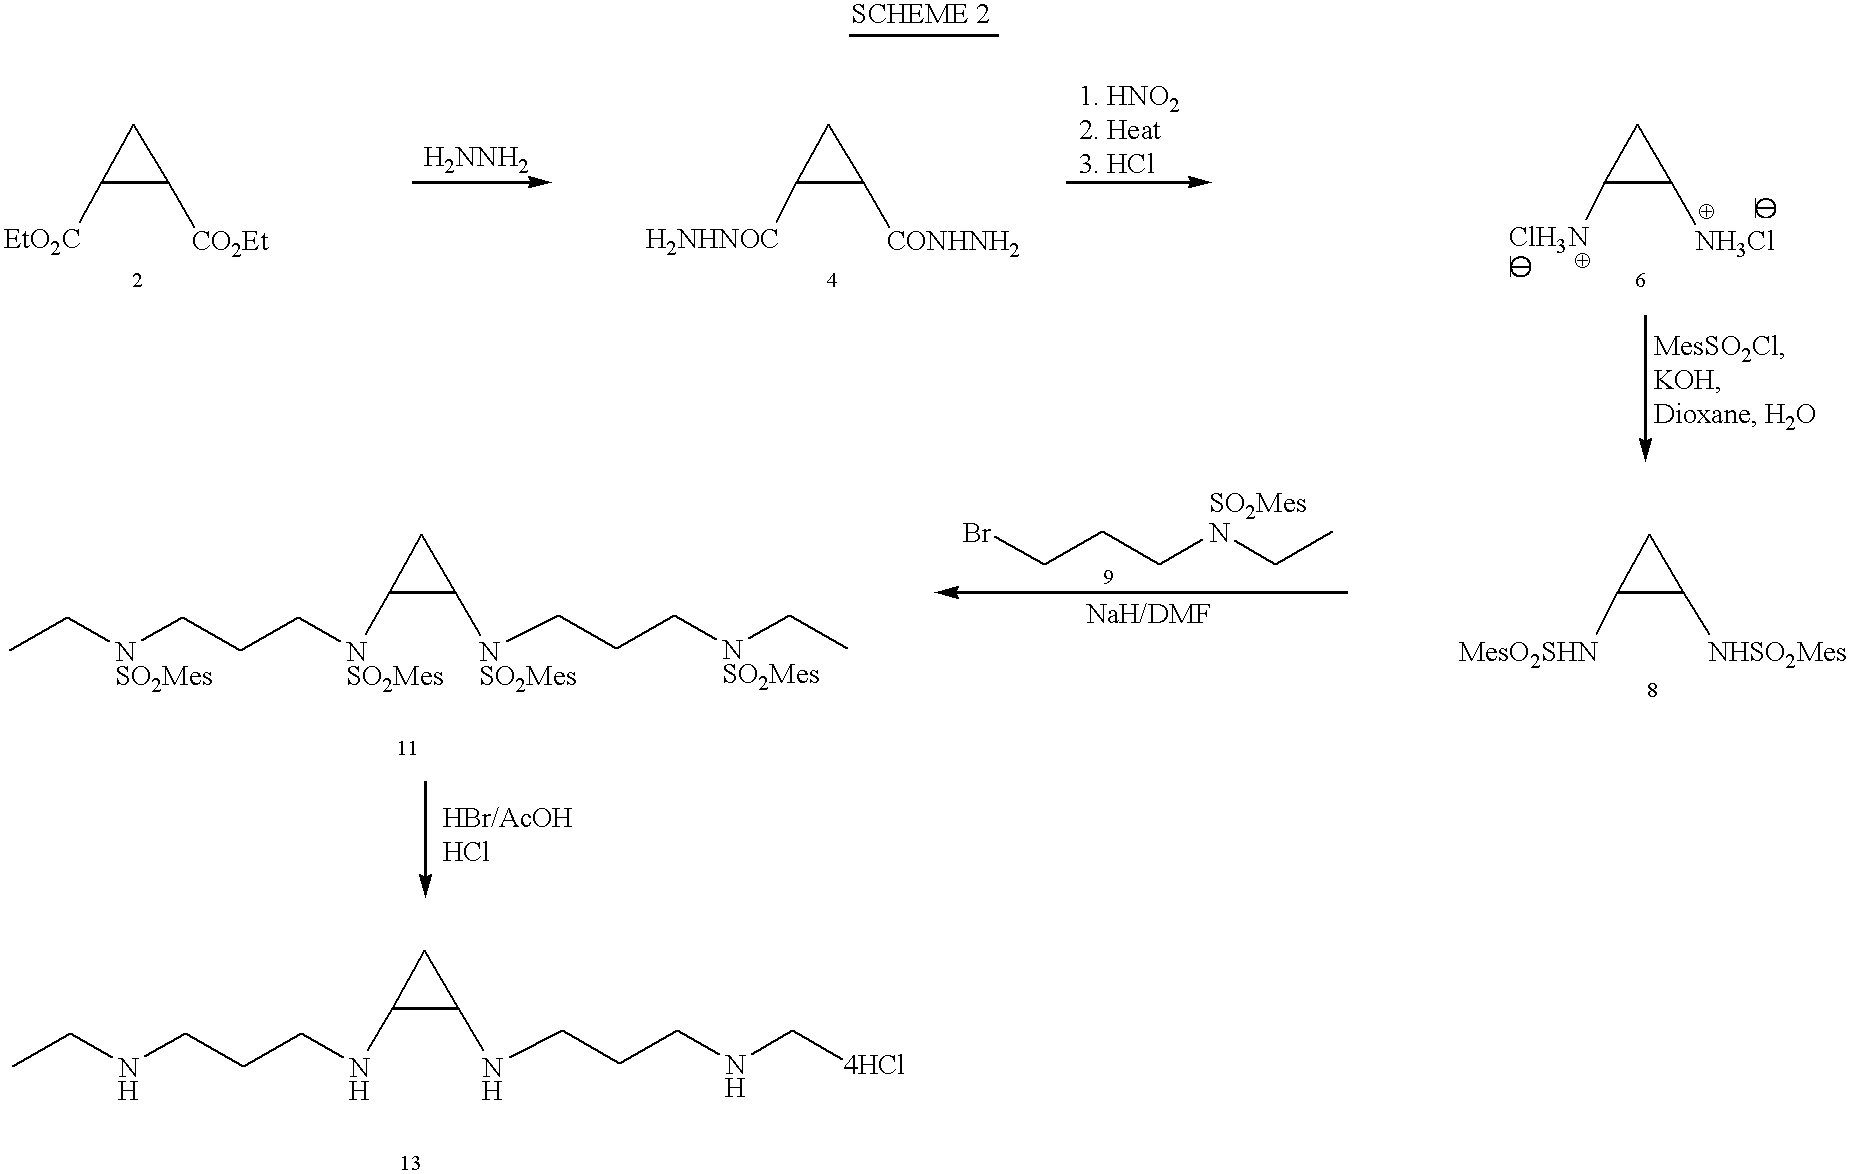 Conformationally restricted polyamines